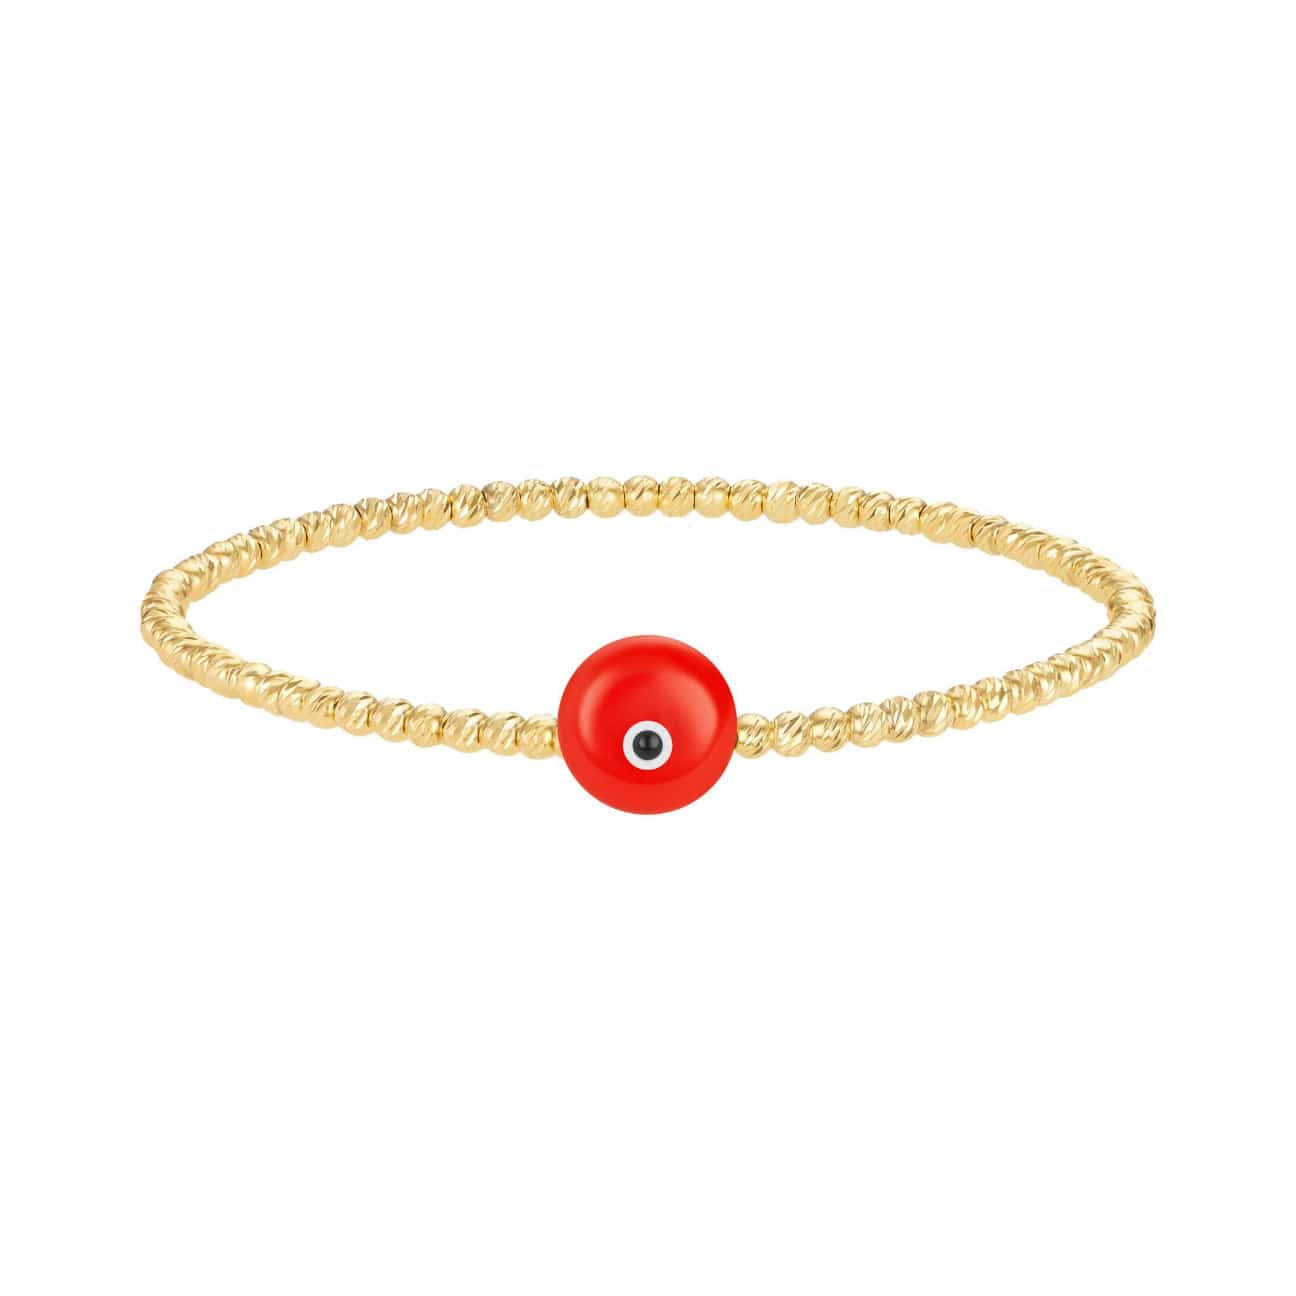 Bead Bracelet with Majestic Evil Eye - Yellow Gold and Coral - Golden Tangerine